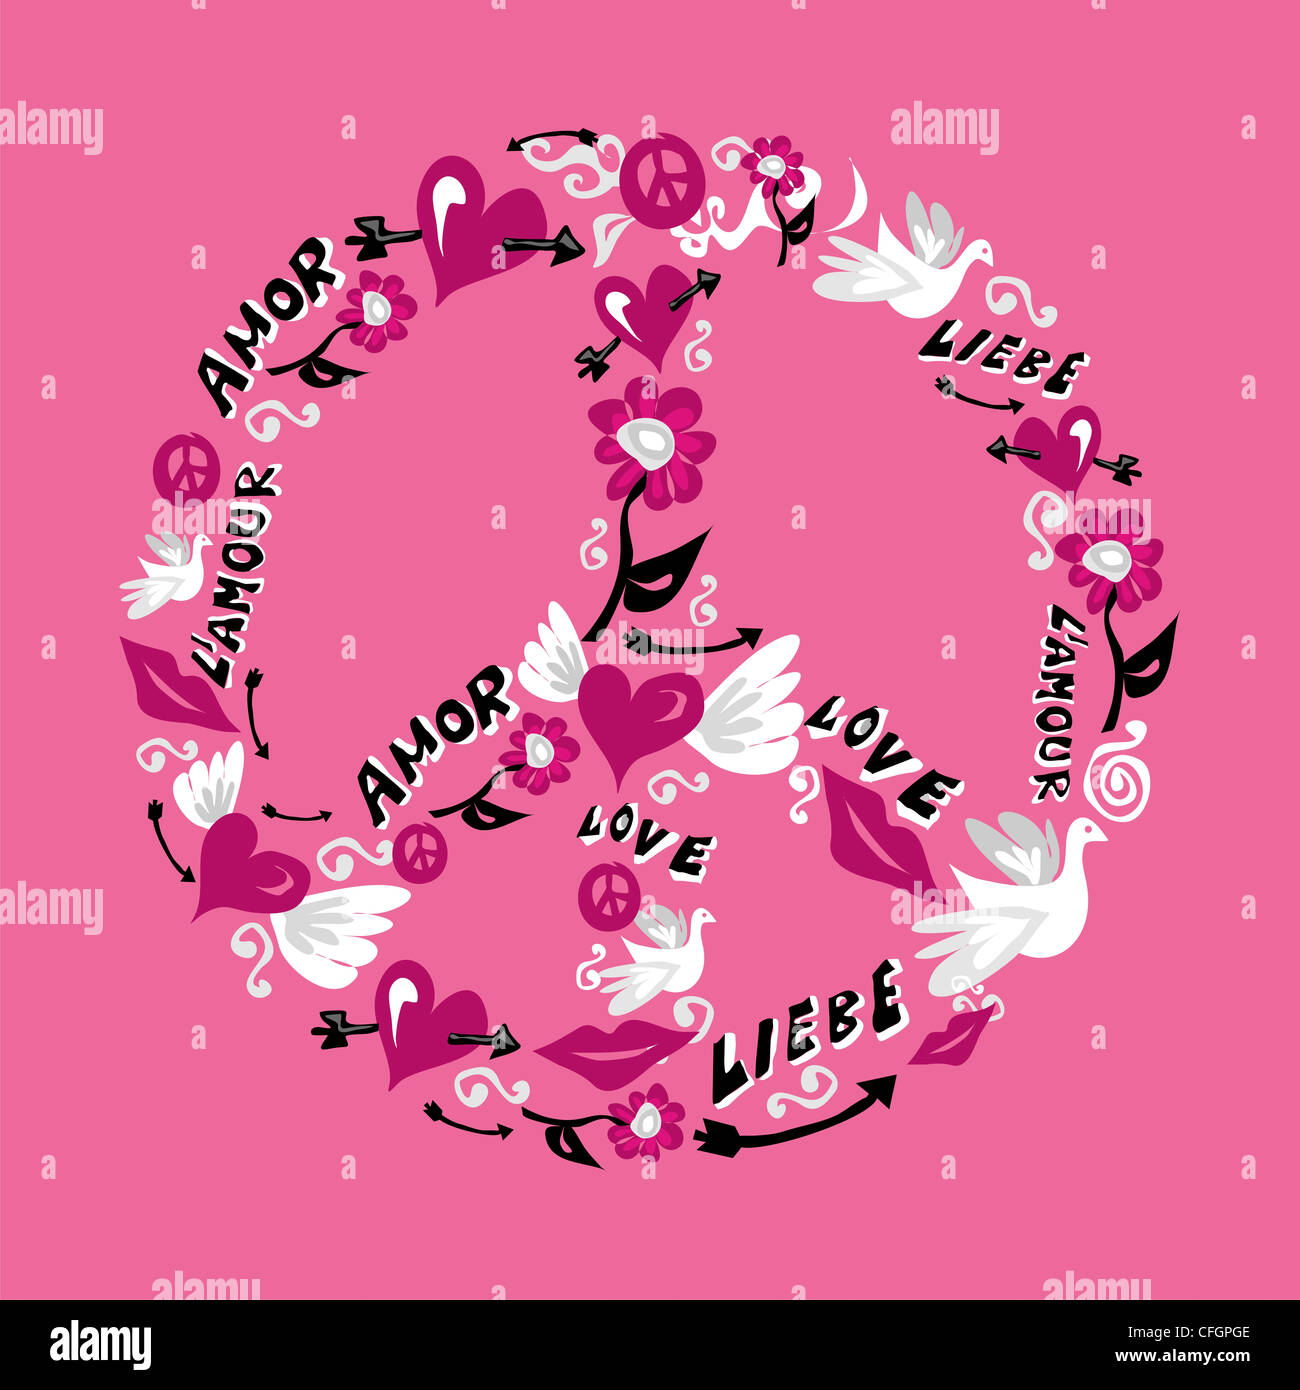 Symbol of peace made with icons of love over pink background. Vector file available. Stock Photo